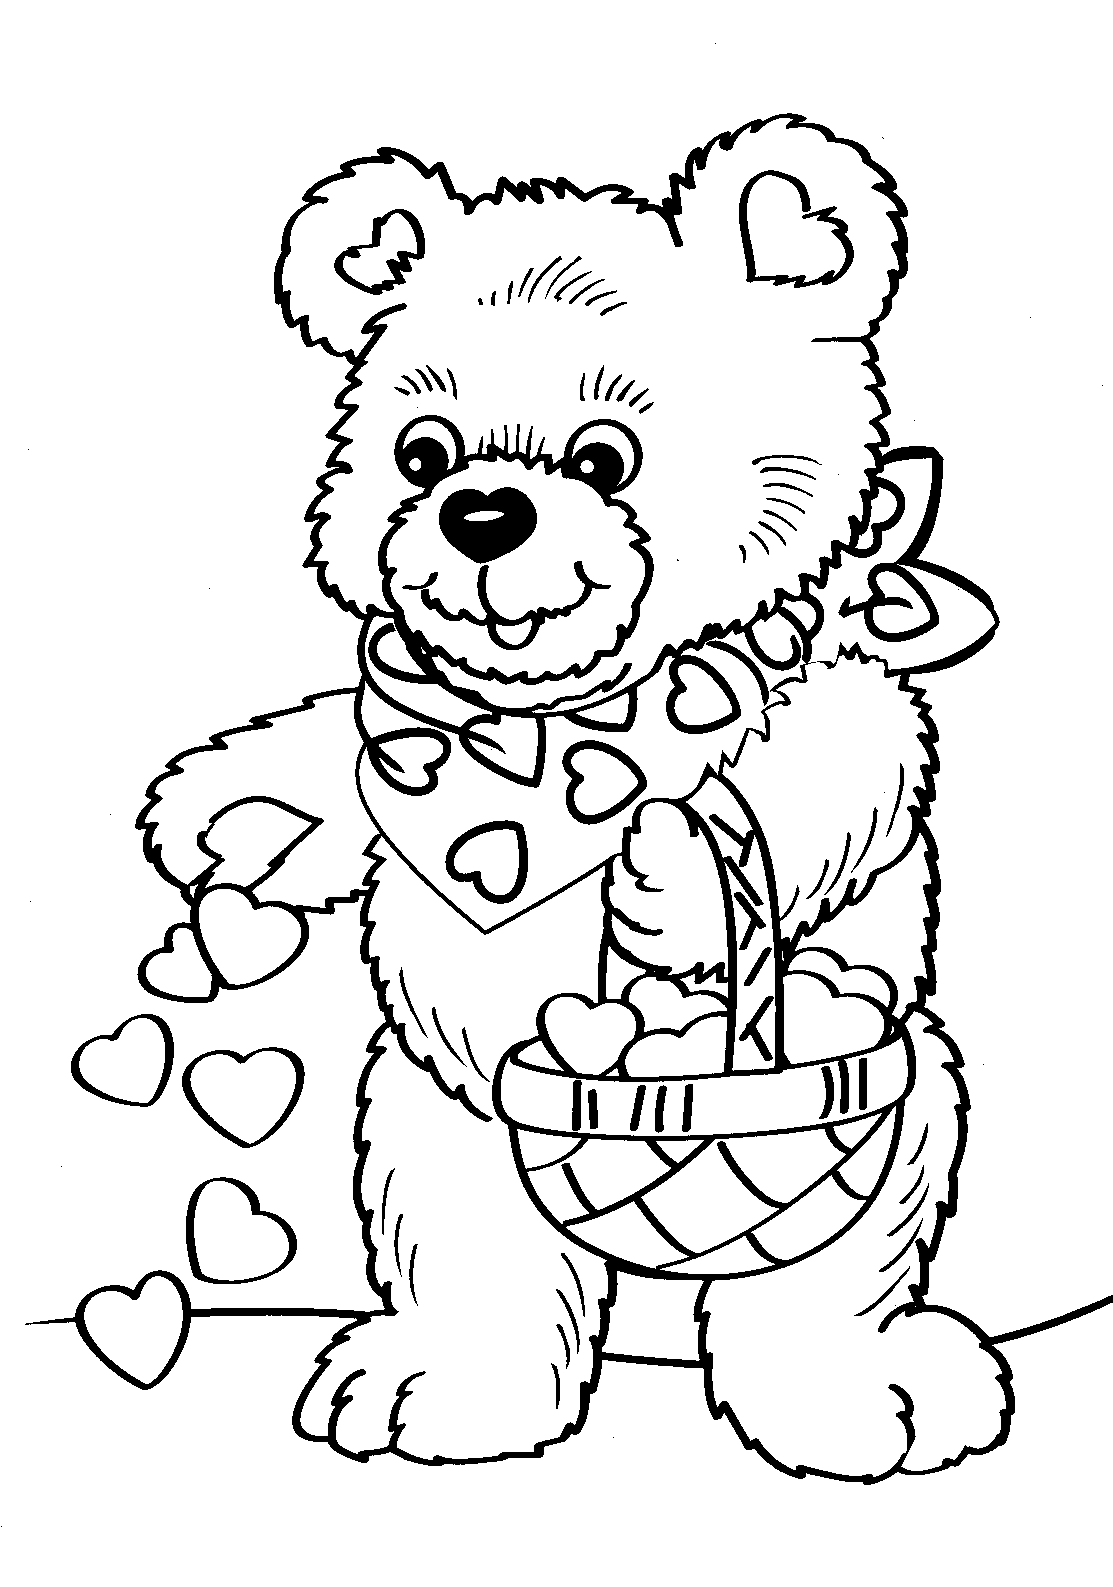 Black and white picture of a bear with hearts free image download